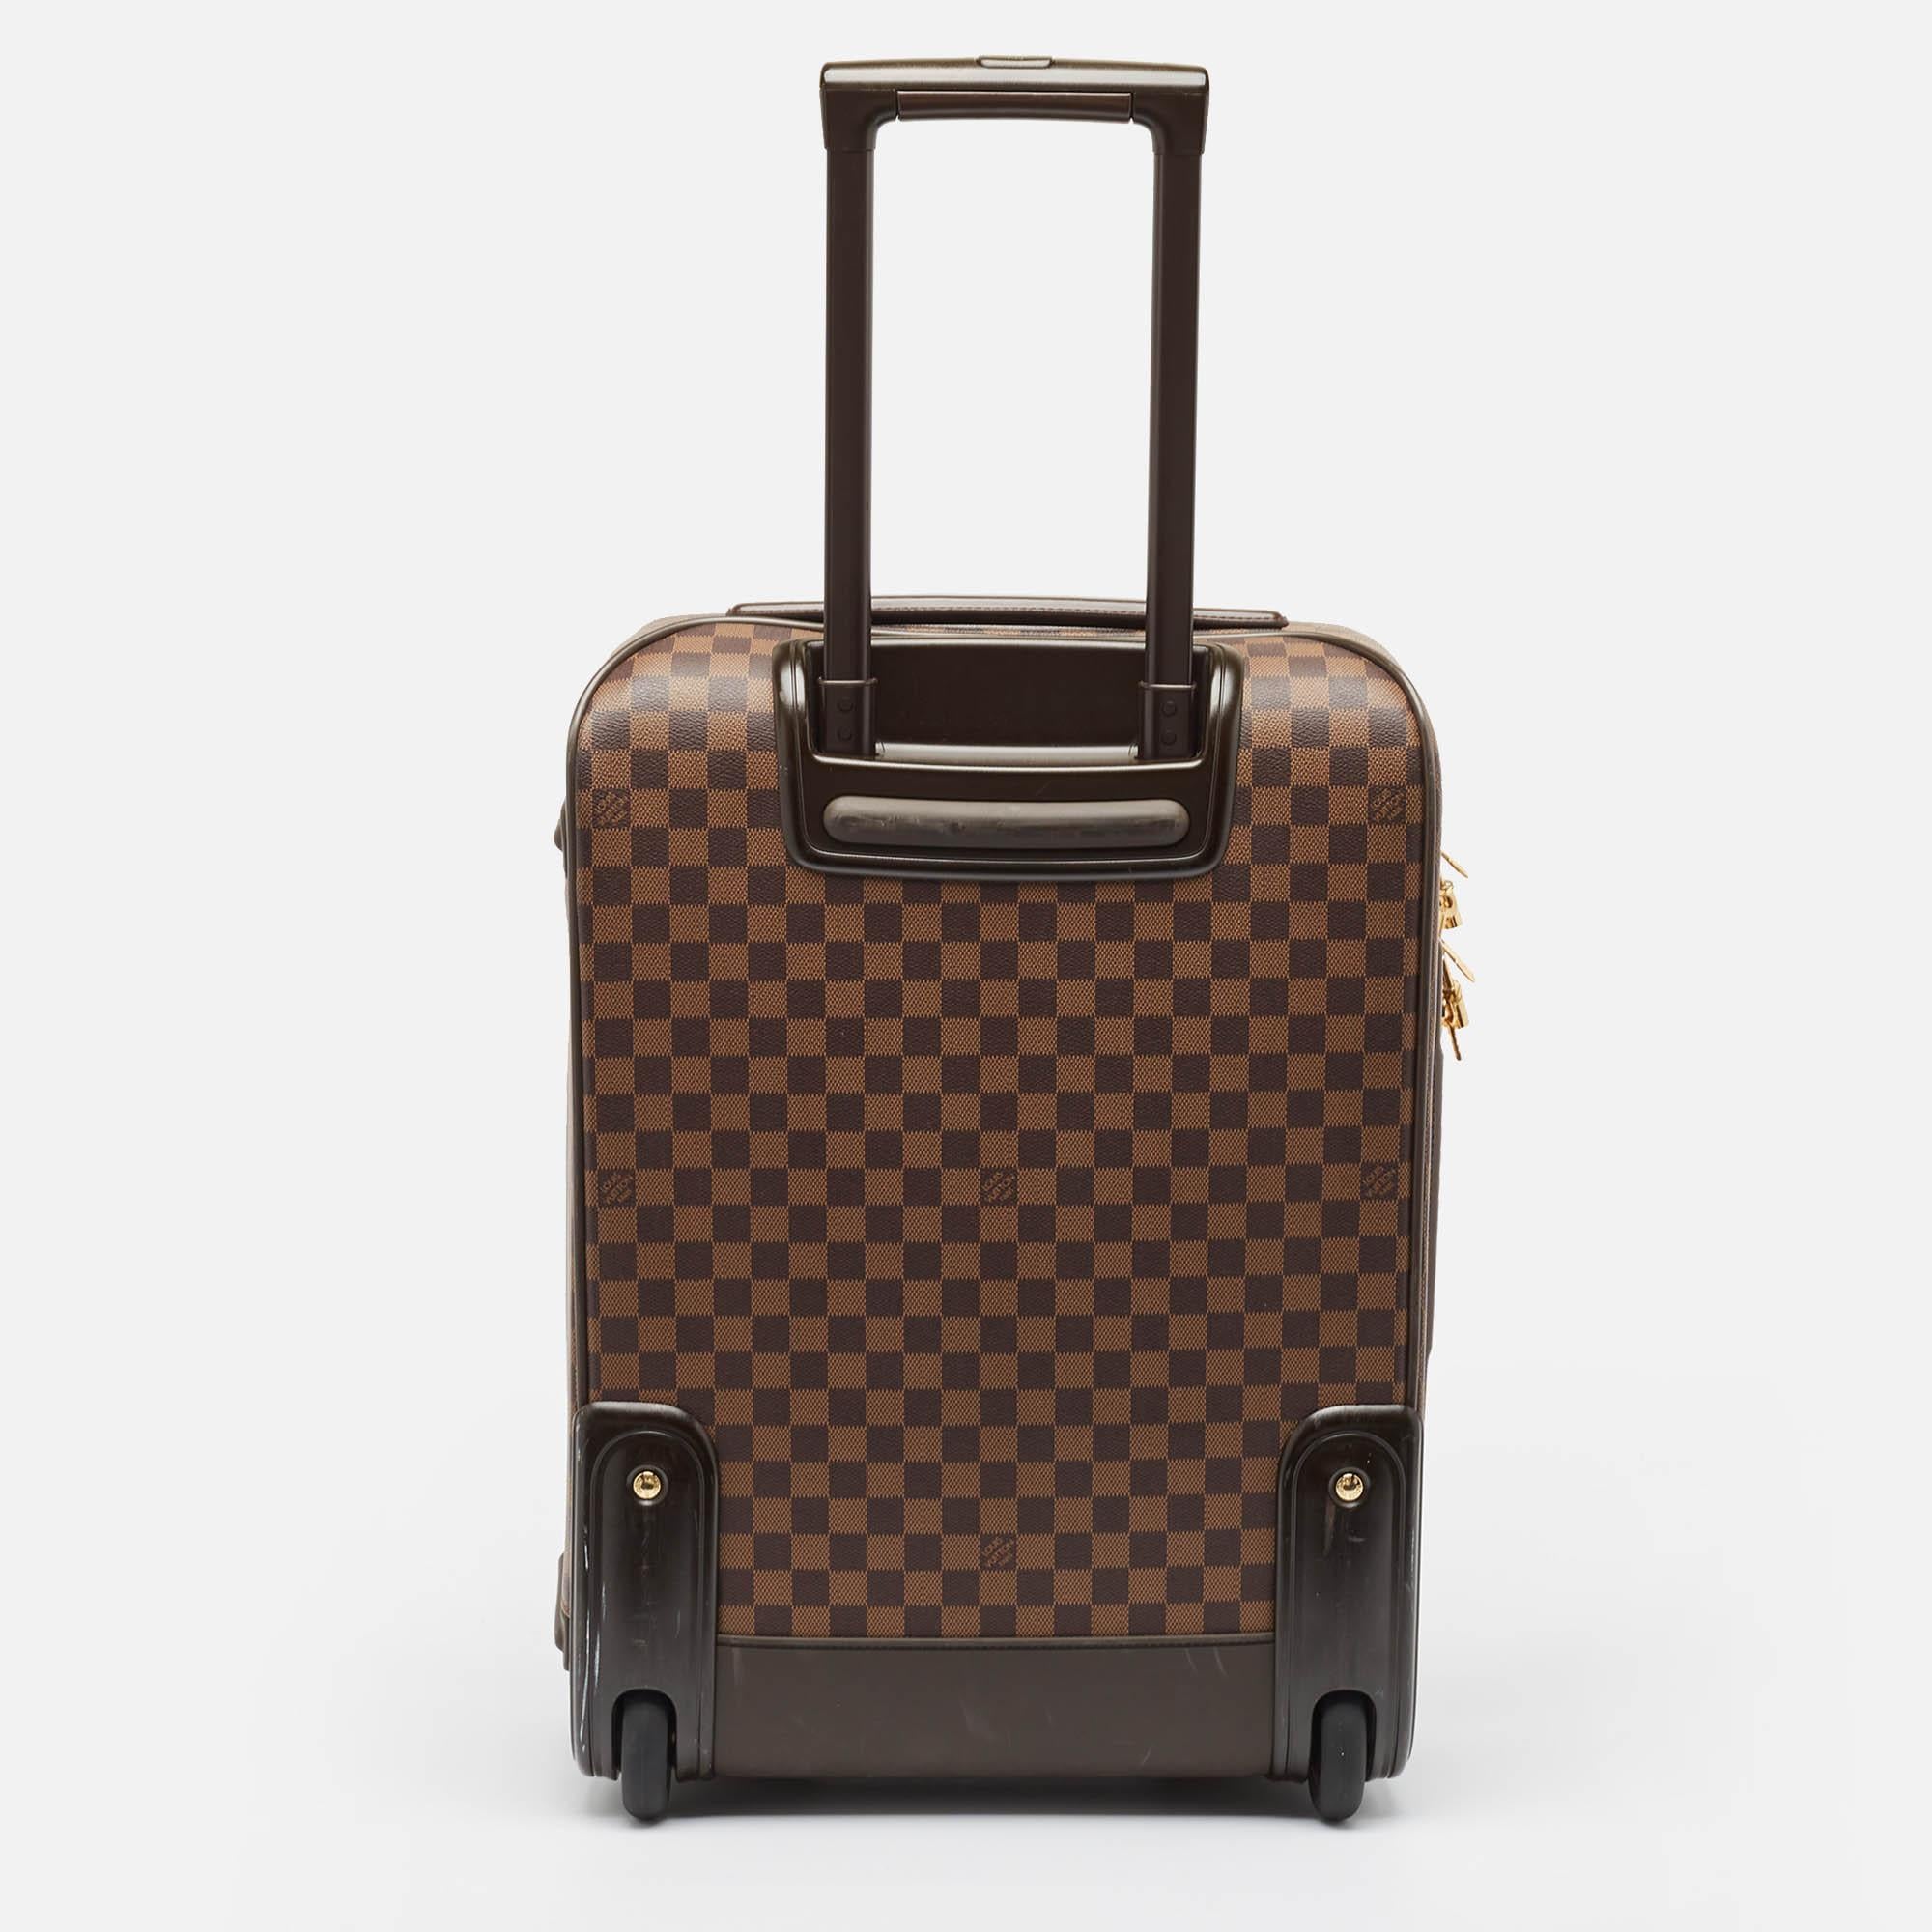 Featuring a luxurious style, this Louis Vuitton luggage bag is distinctive. Crafted from fine materials, the bag is equipped with trolly wheels and zippers. It offers a roomy interior to fit all your essentials and more neatly. It is the perfect